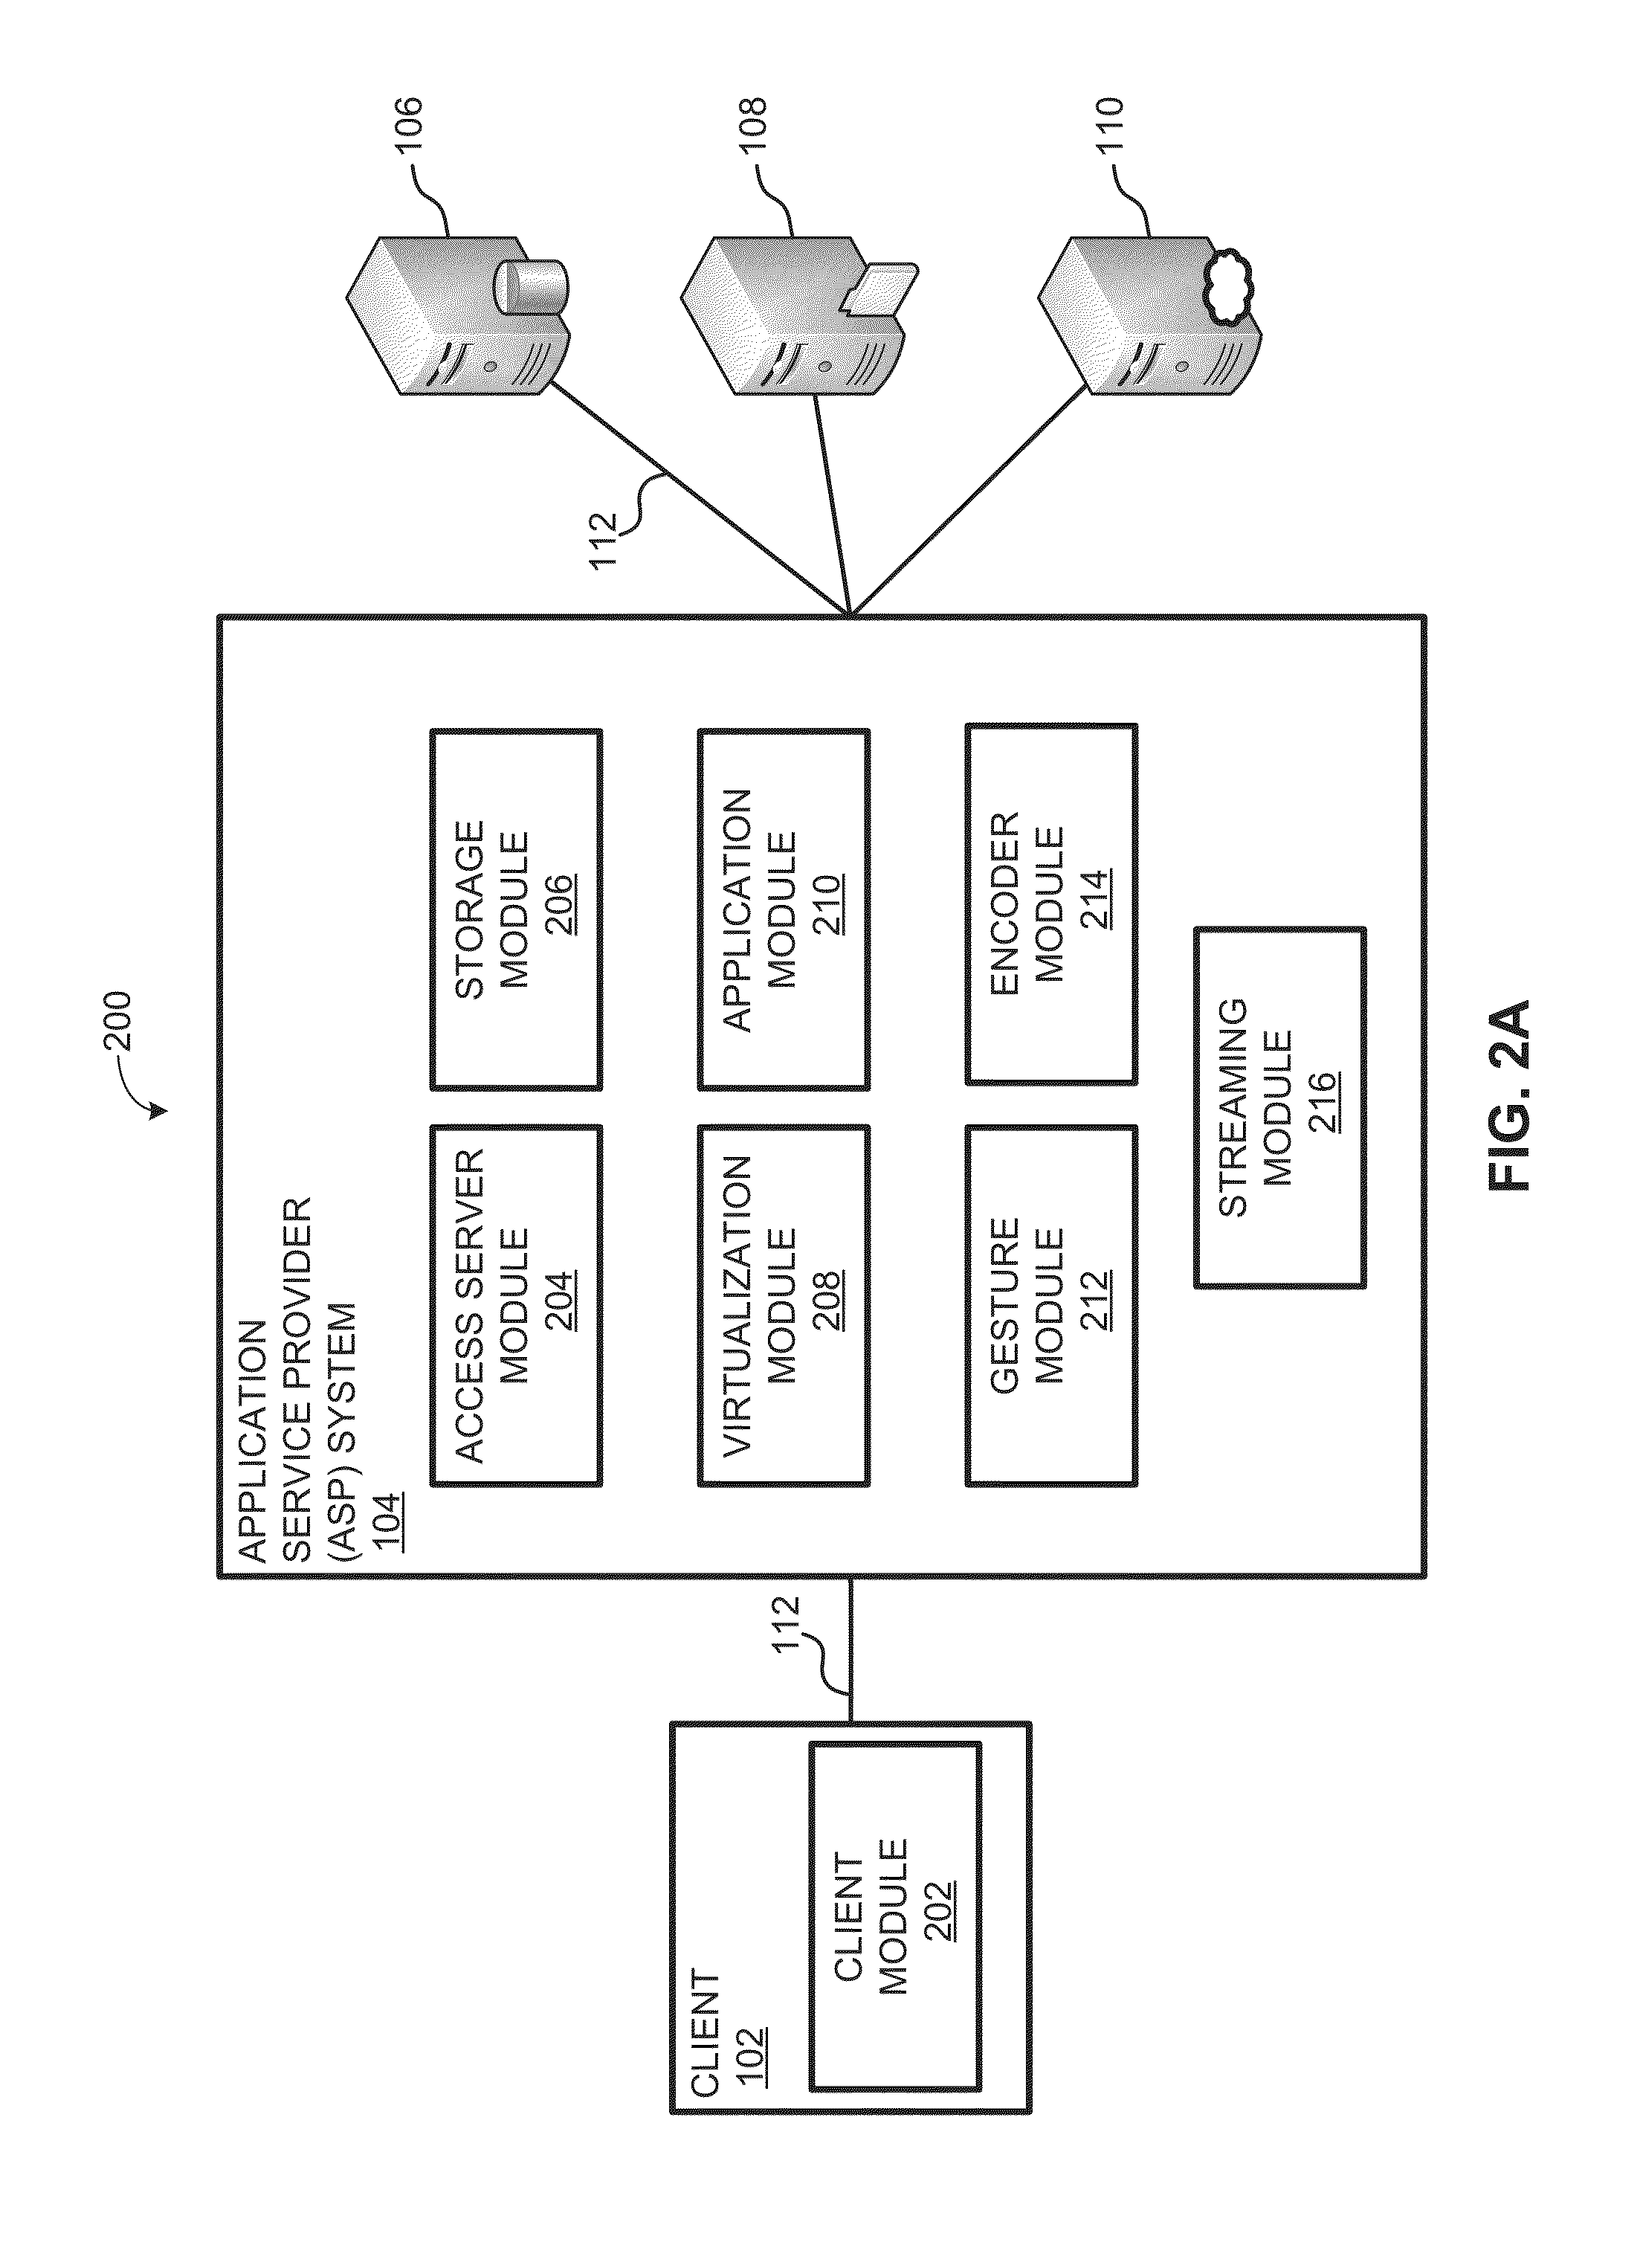 Systems and Methods for Graphical User Interface Interaction with Cloud-Based Applications